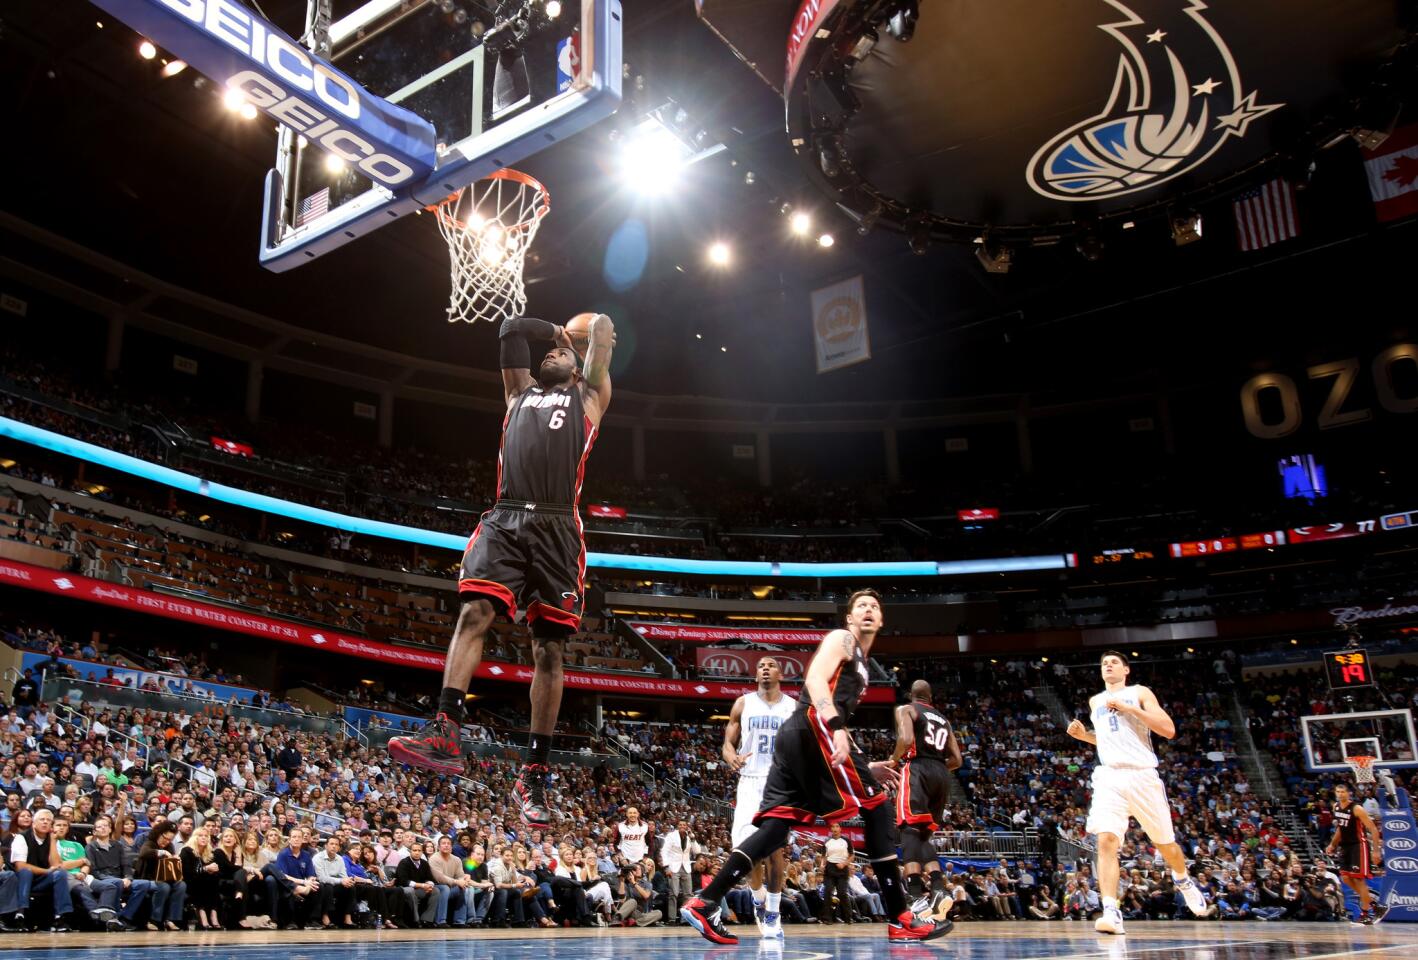 Miami forward LeBron James (6) dunks off a fast break during the second half of the Heat's 112-110 overtime victory over the Orlando Magic in Orlando, Fla.